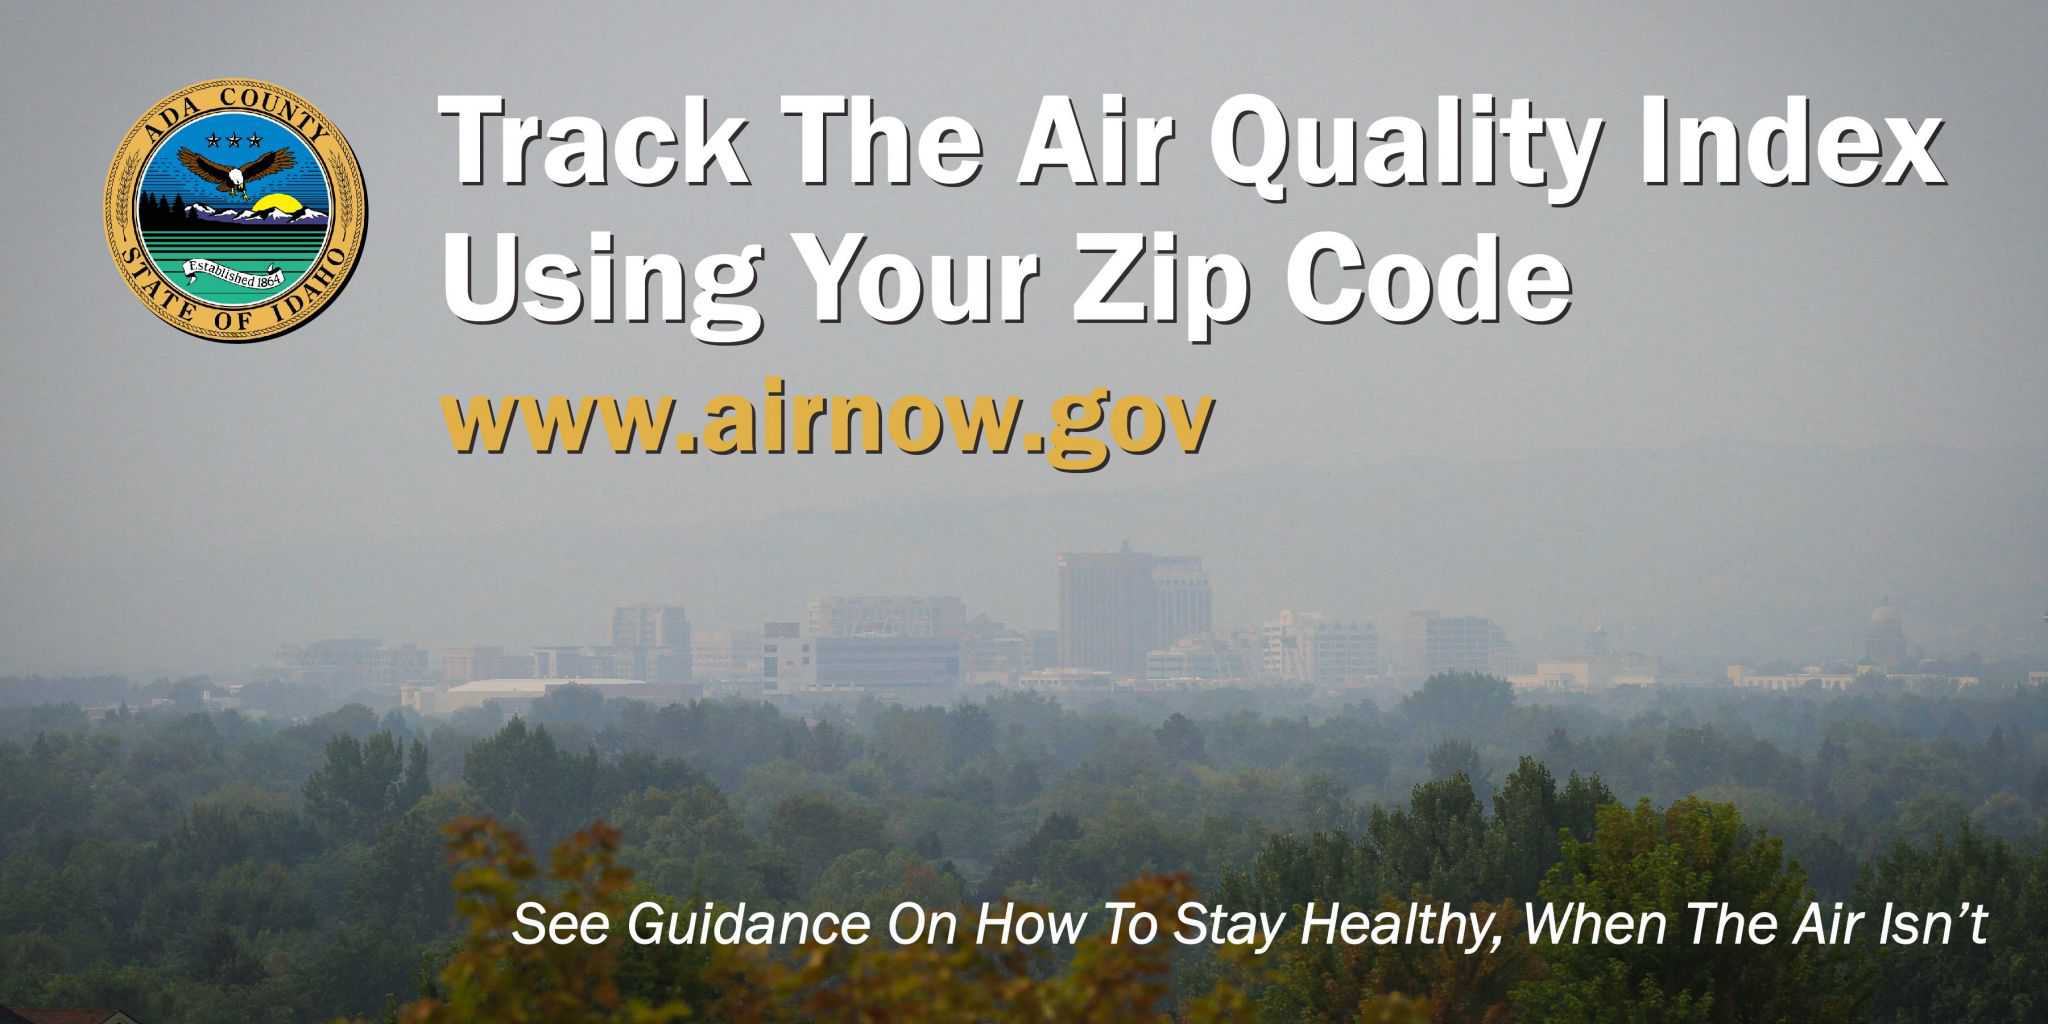 Track Air Quality indes at www.airnow.gov